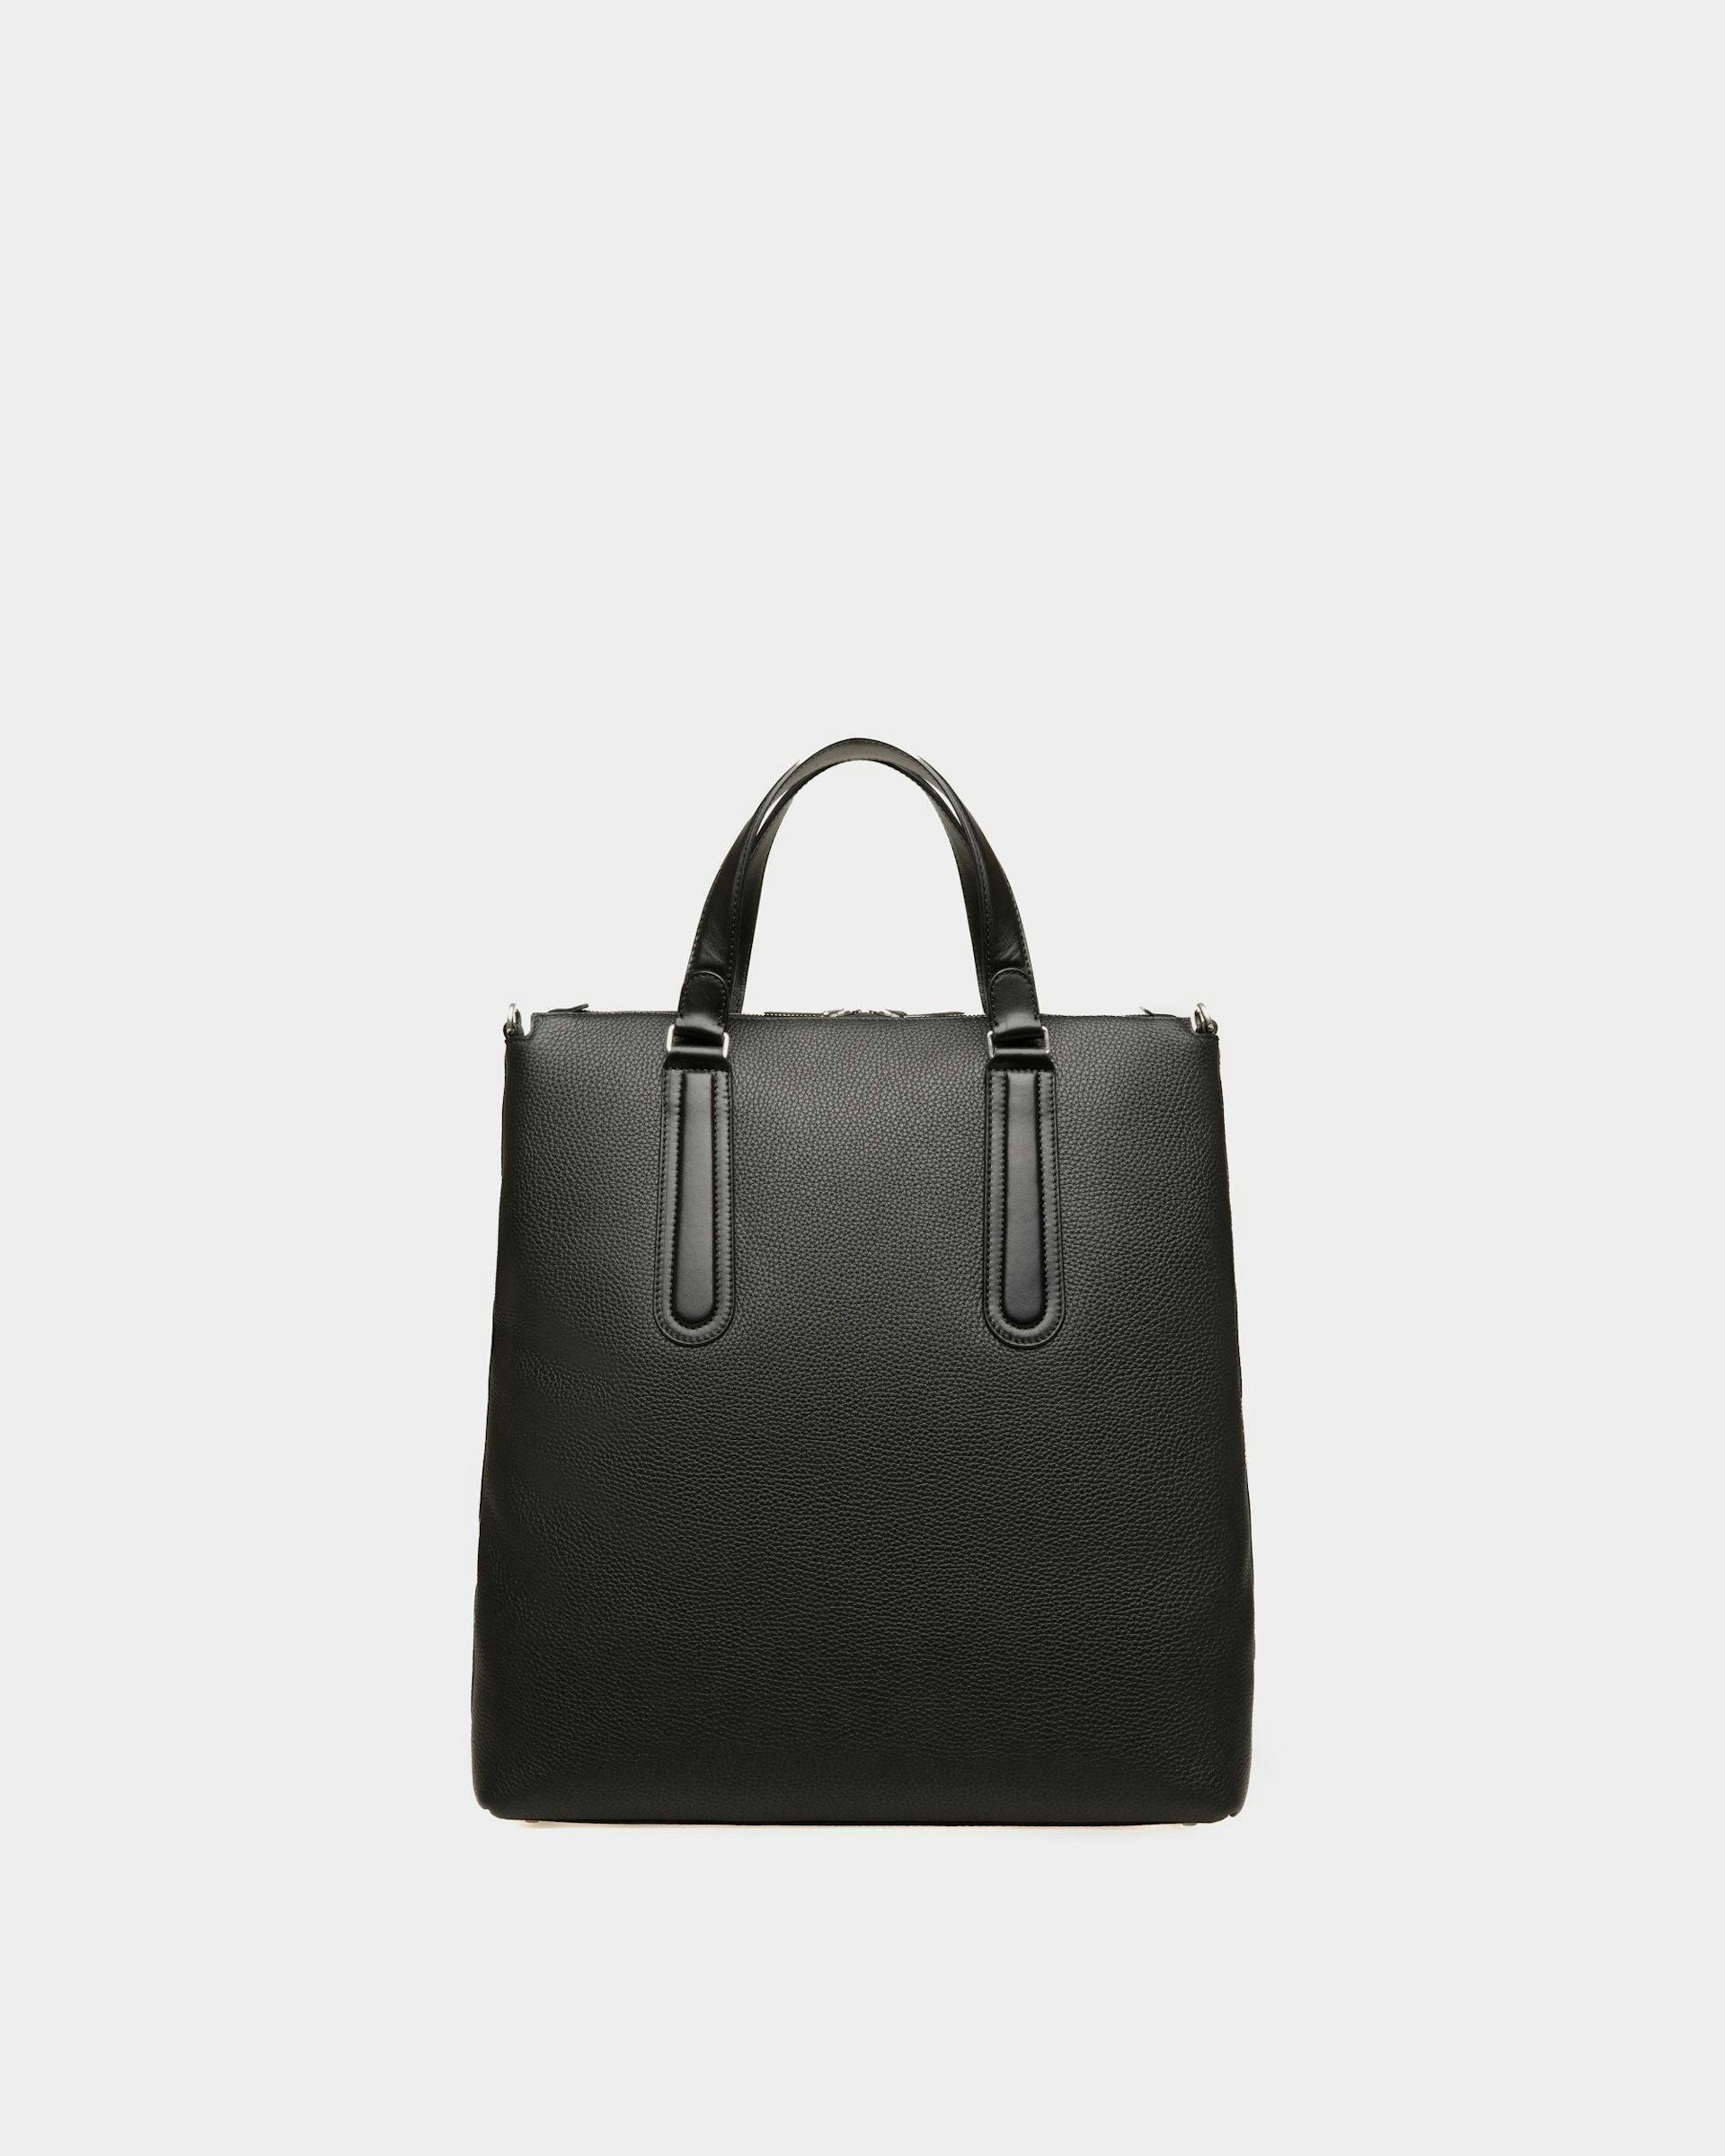 Men's Spin Tote in Black Grained Leather | Bally | Still Life Back